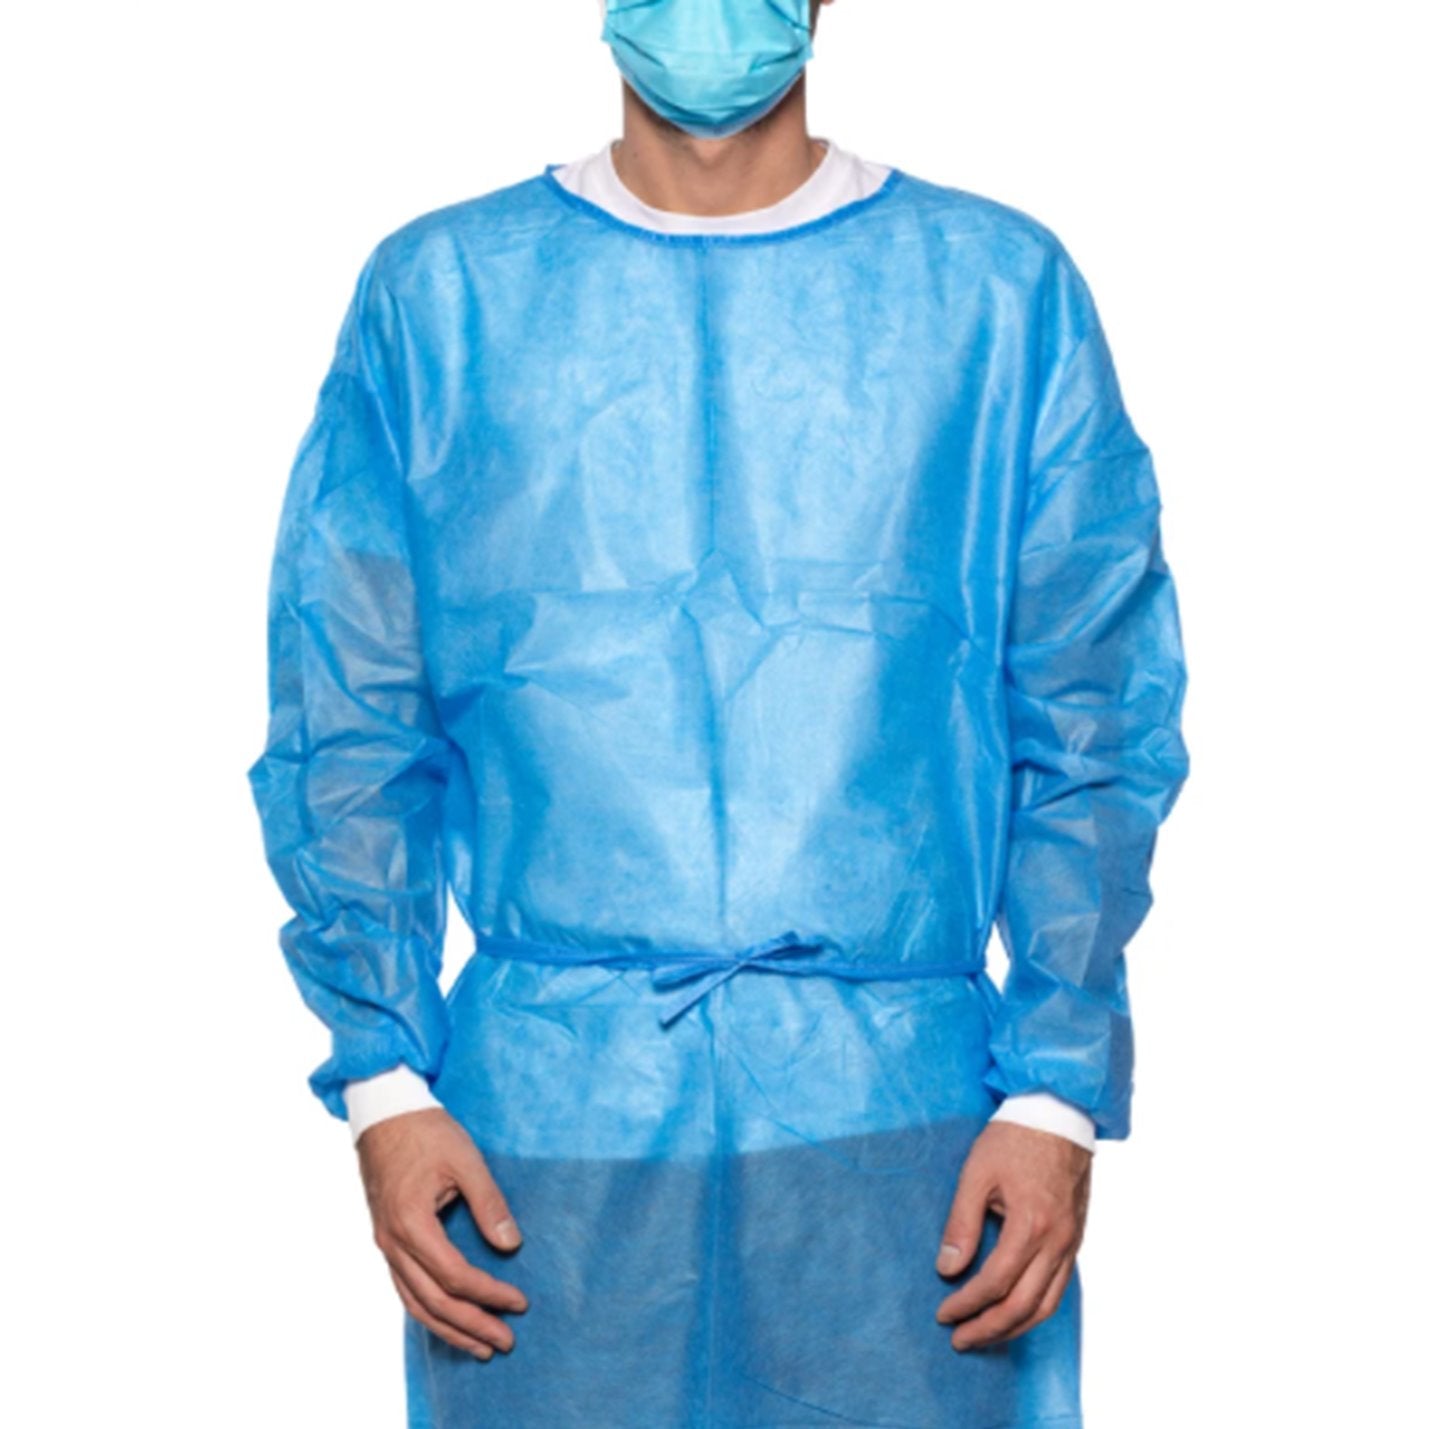 Isolation Gowns Blue $2.55 (Box of 10) - DEX